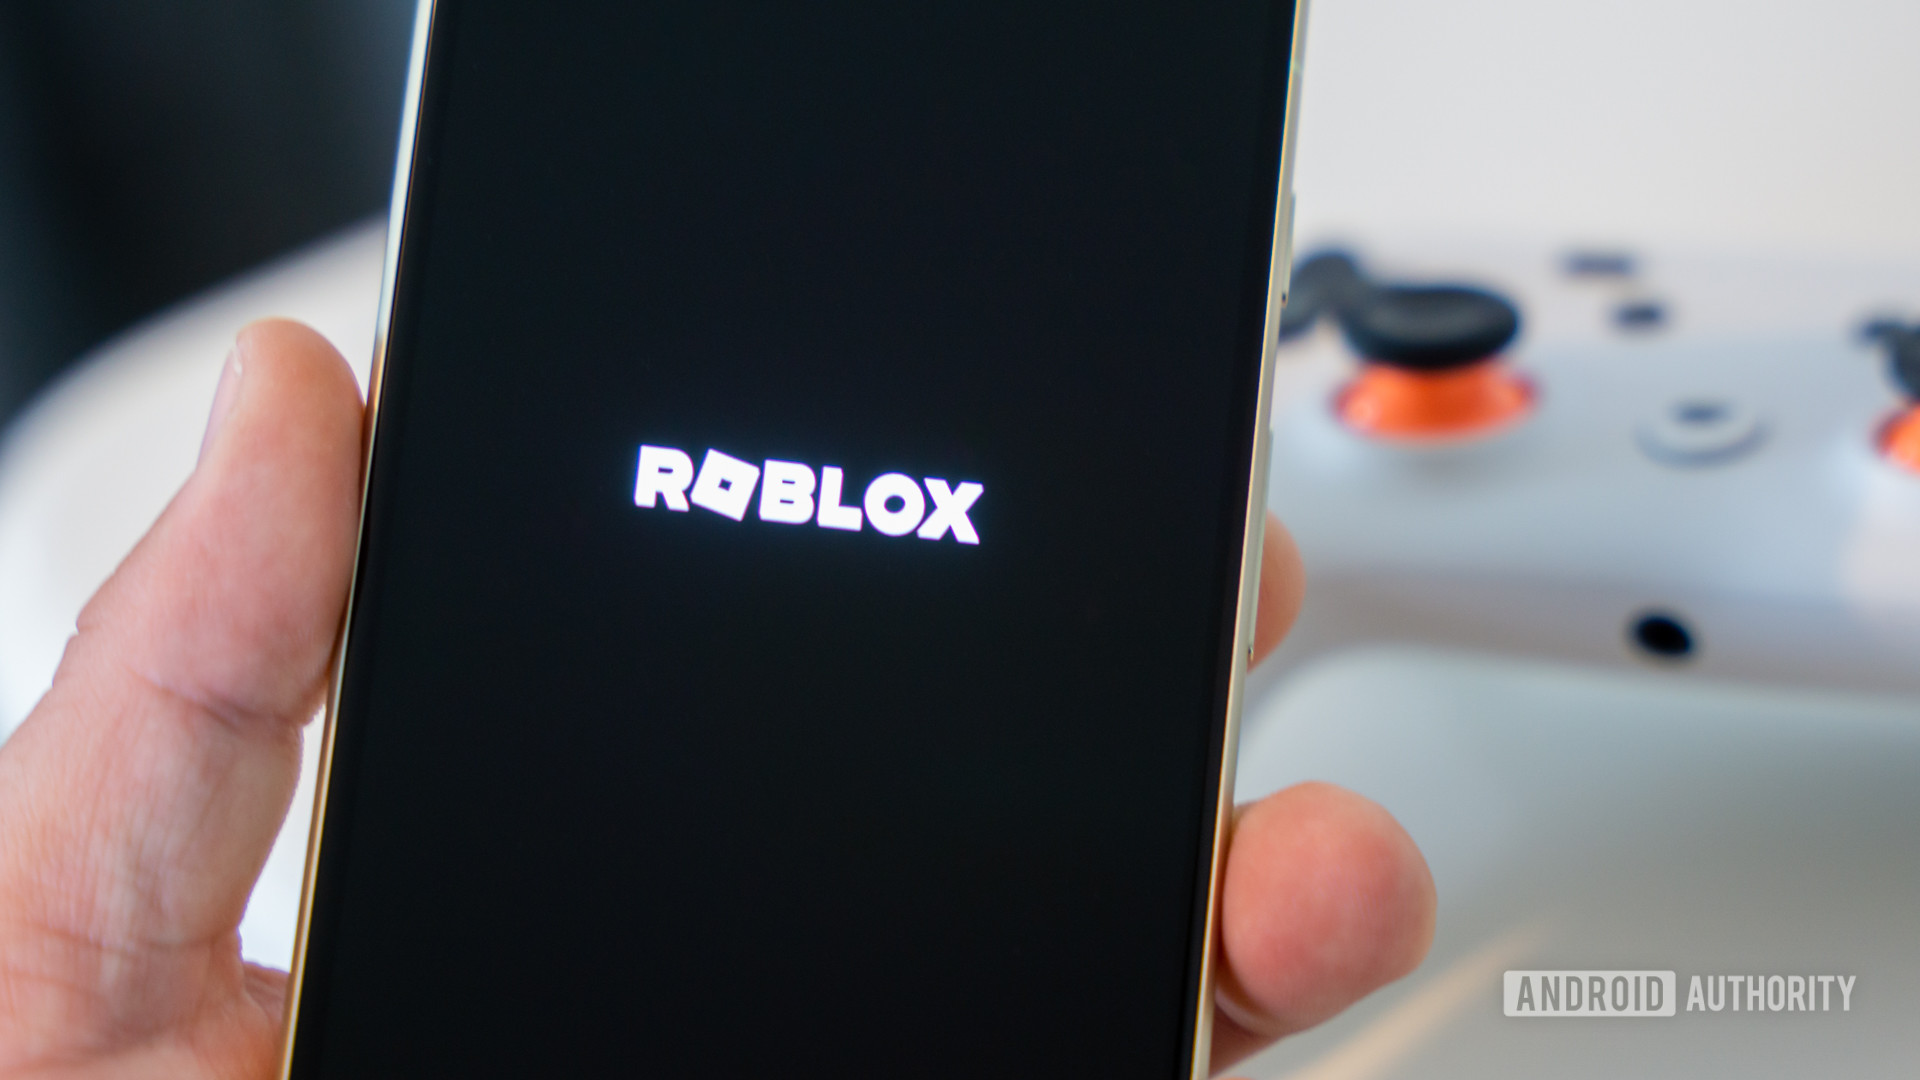 Roblox game logo on smartphone next to controller Stock photo 5